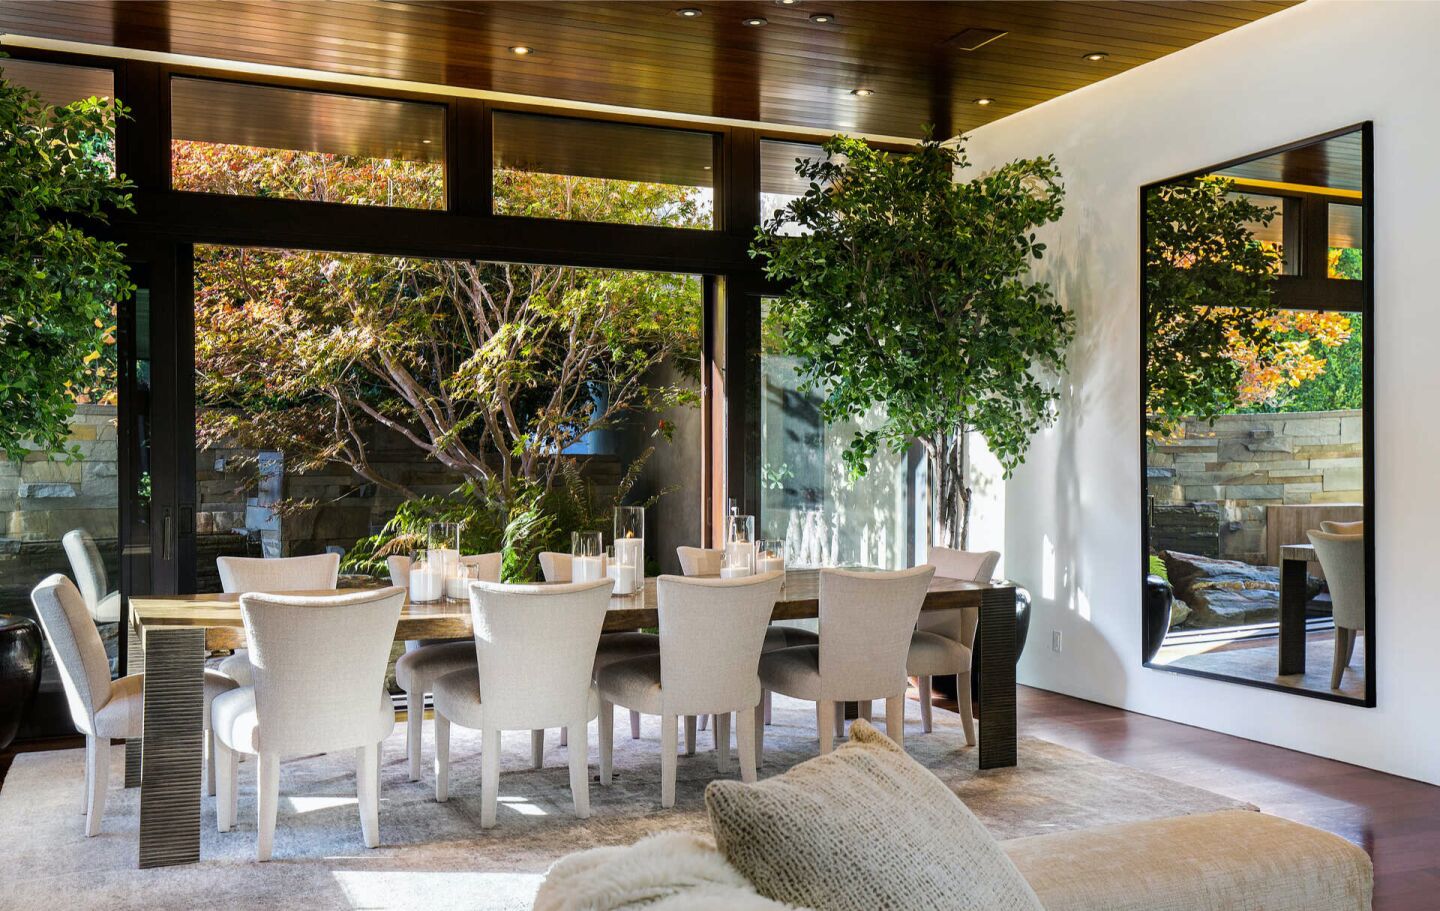 The furnished dining room with big windows overlooking trees.